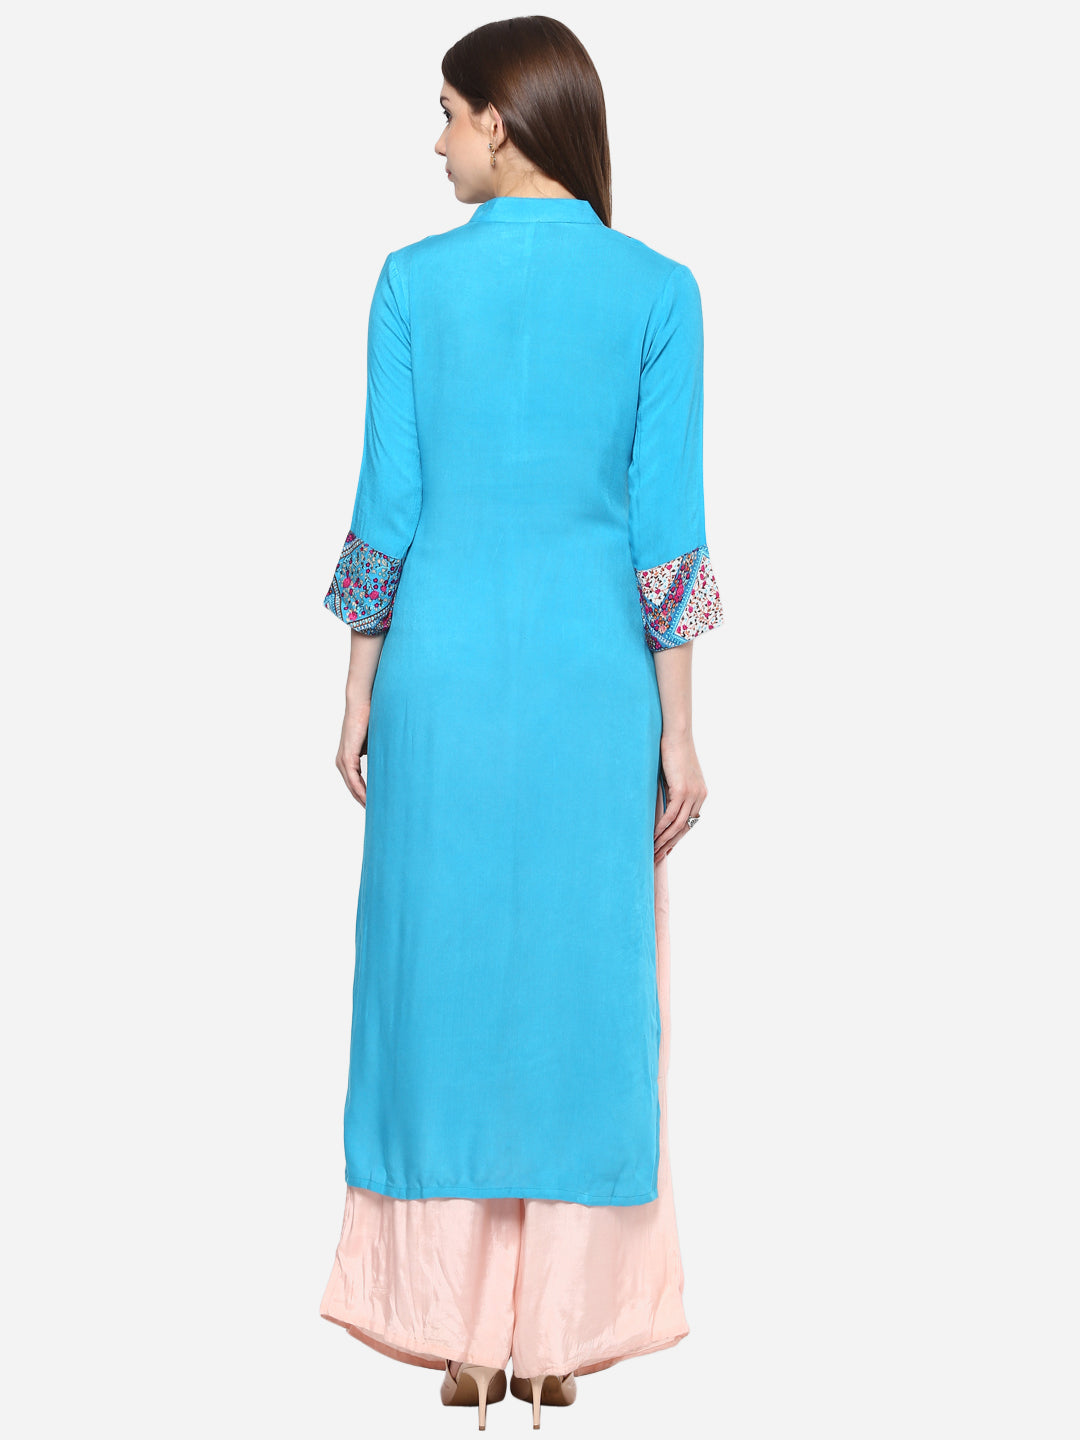 Women's Printed Turquoise and Pink Kurti